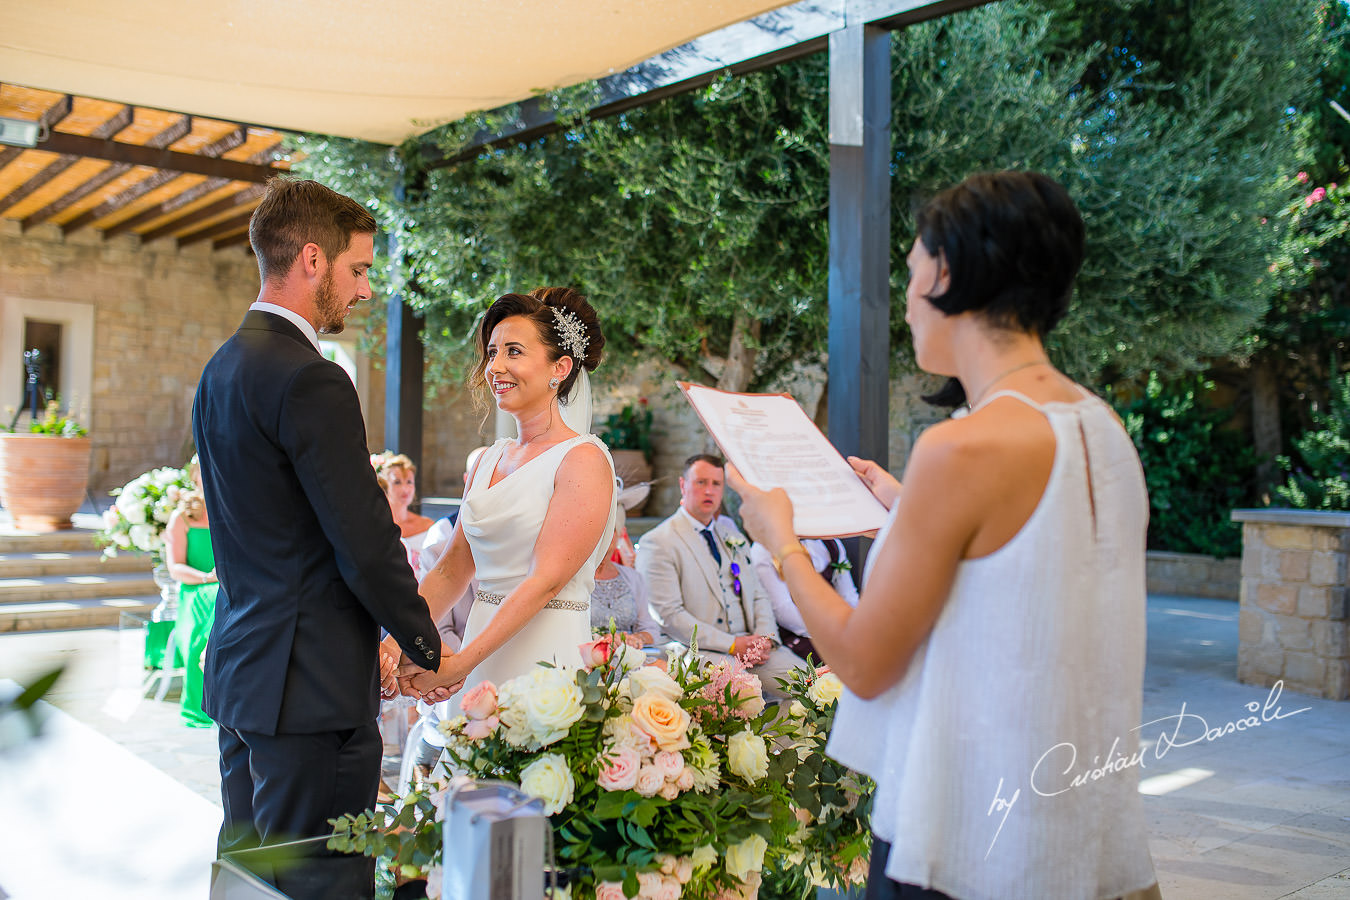 Beautiful moments captured by Cristian Dascalu during an elegant Aphrodite Hills Wedding in Cyprus.